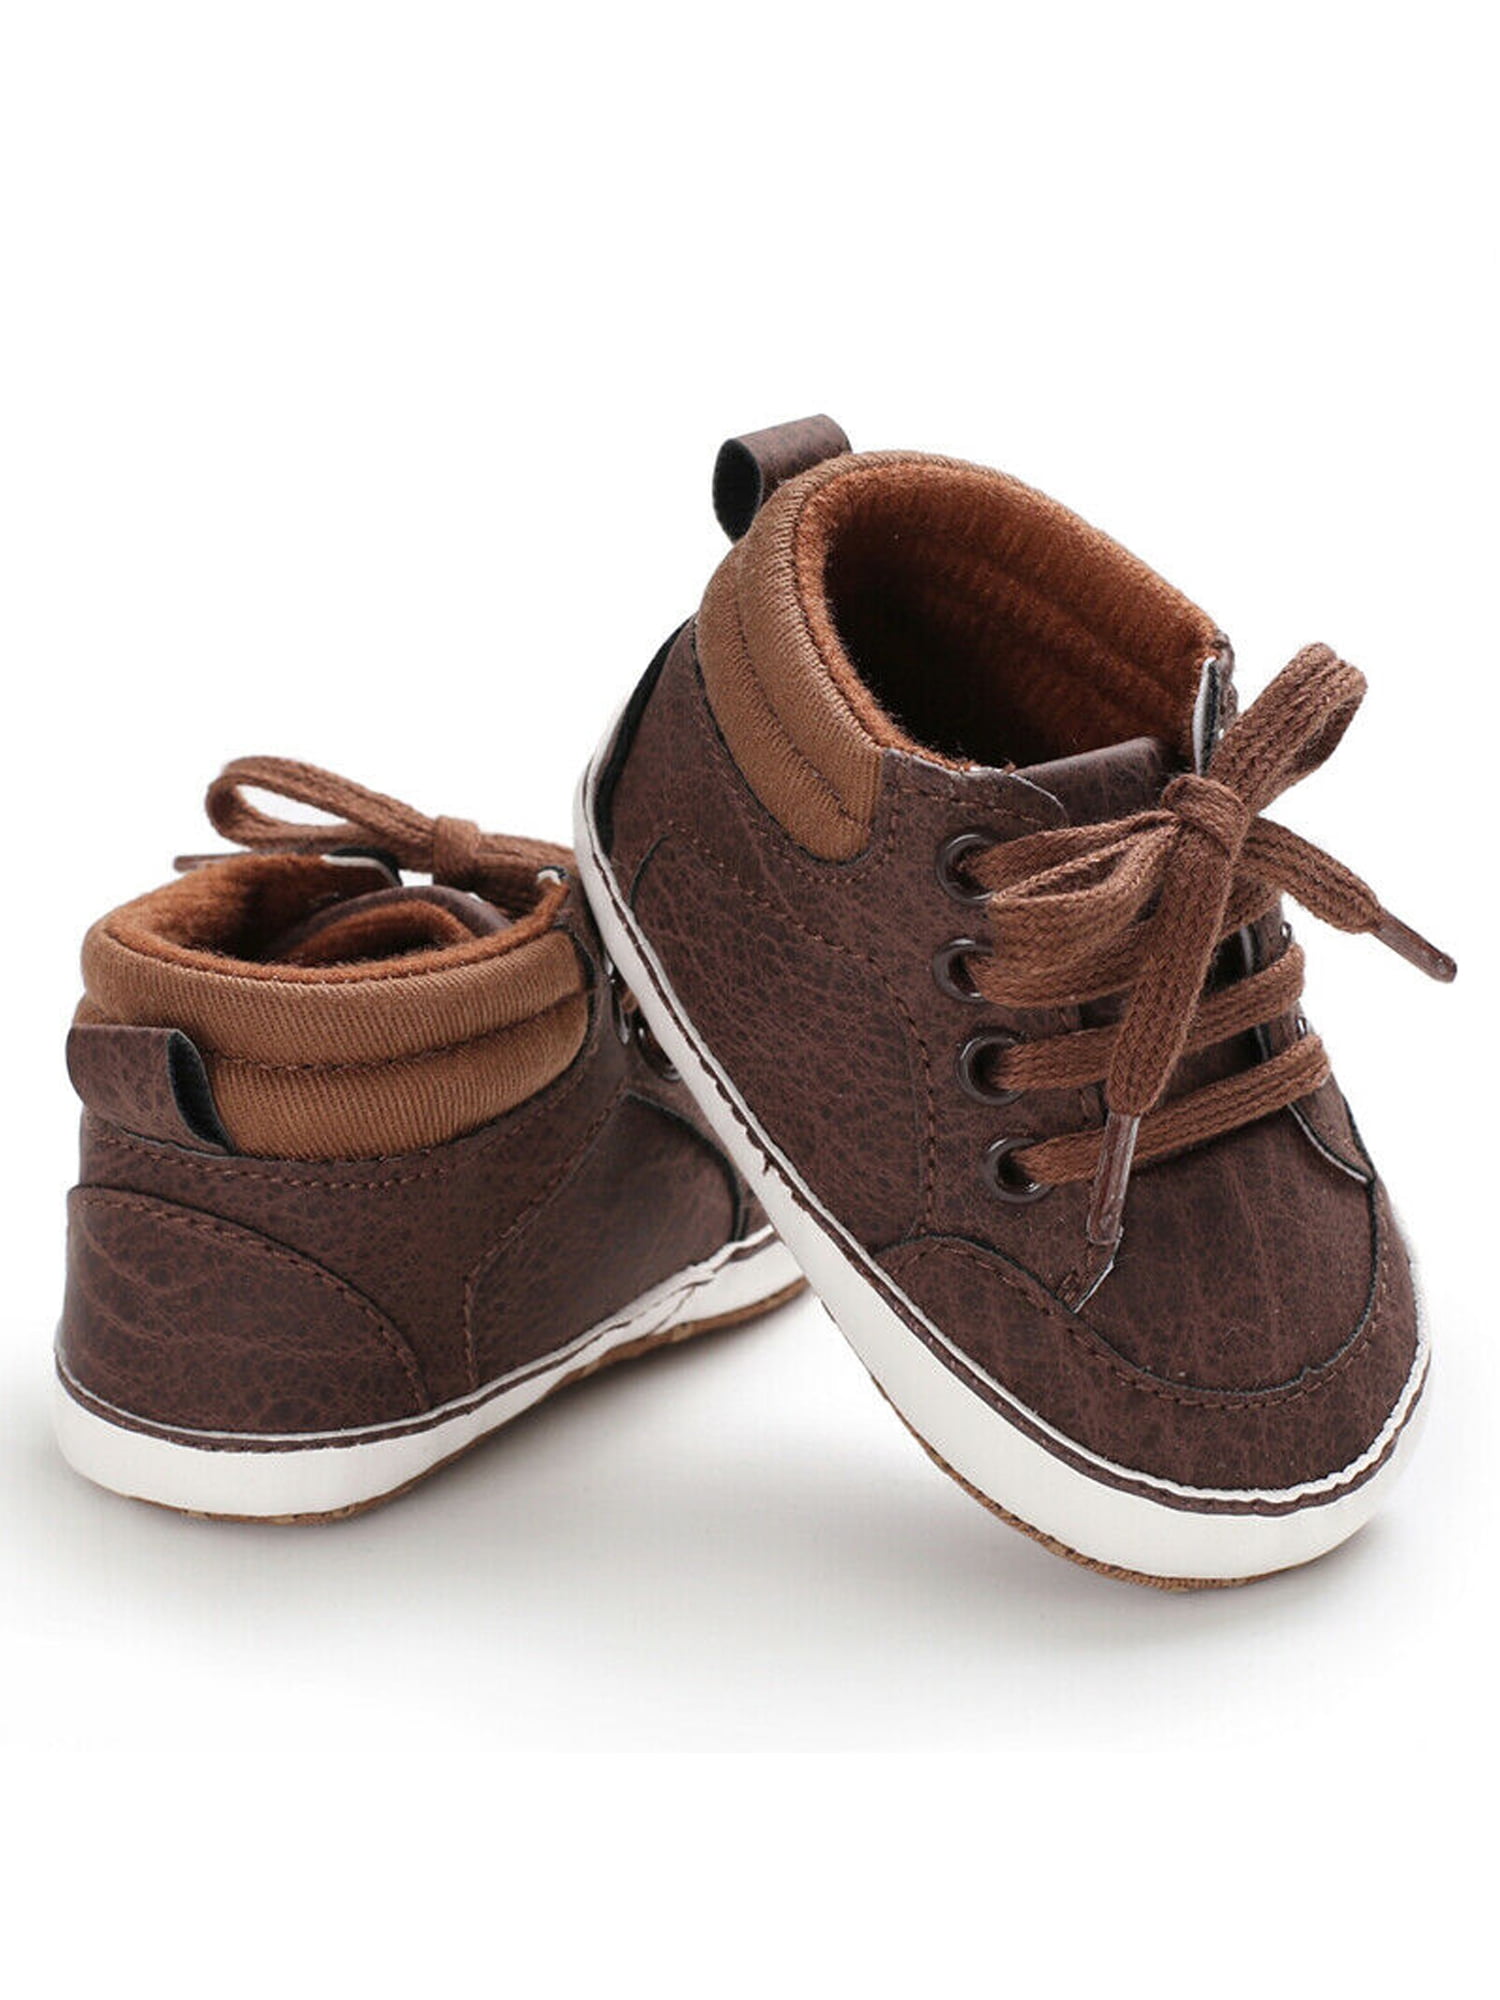 mlpeerw Infant Baby Boys Girl Shoes Newborn Soft Sole Sneaker Cotton ...